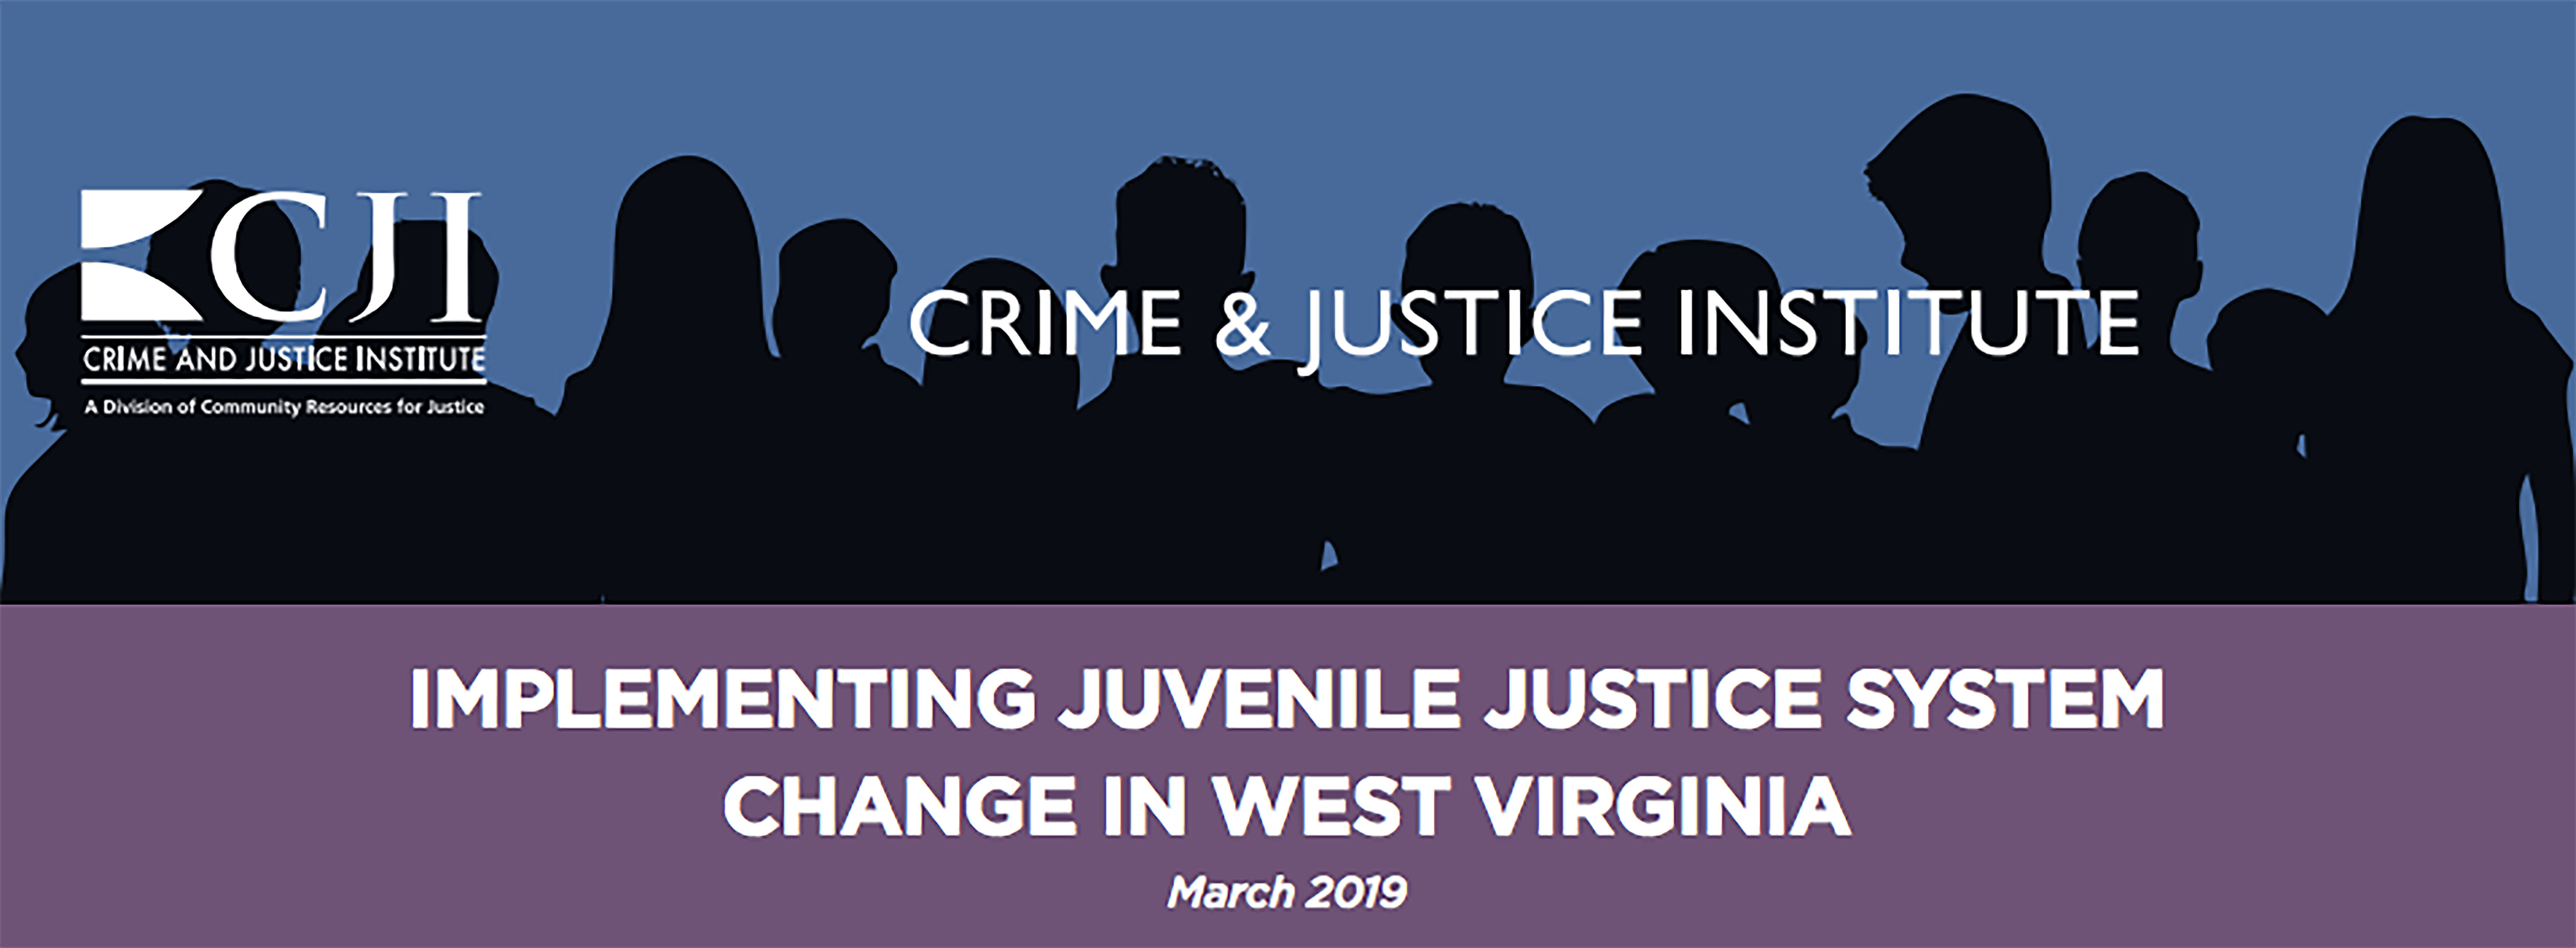 Implementing Juvenile Justice System Change in West Virginia